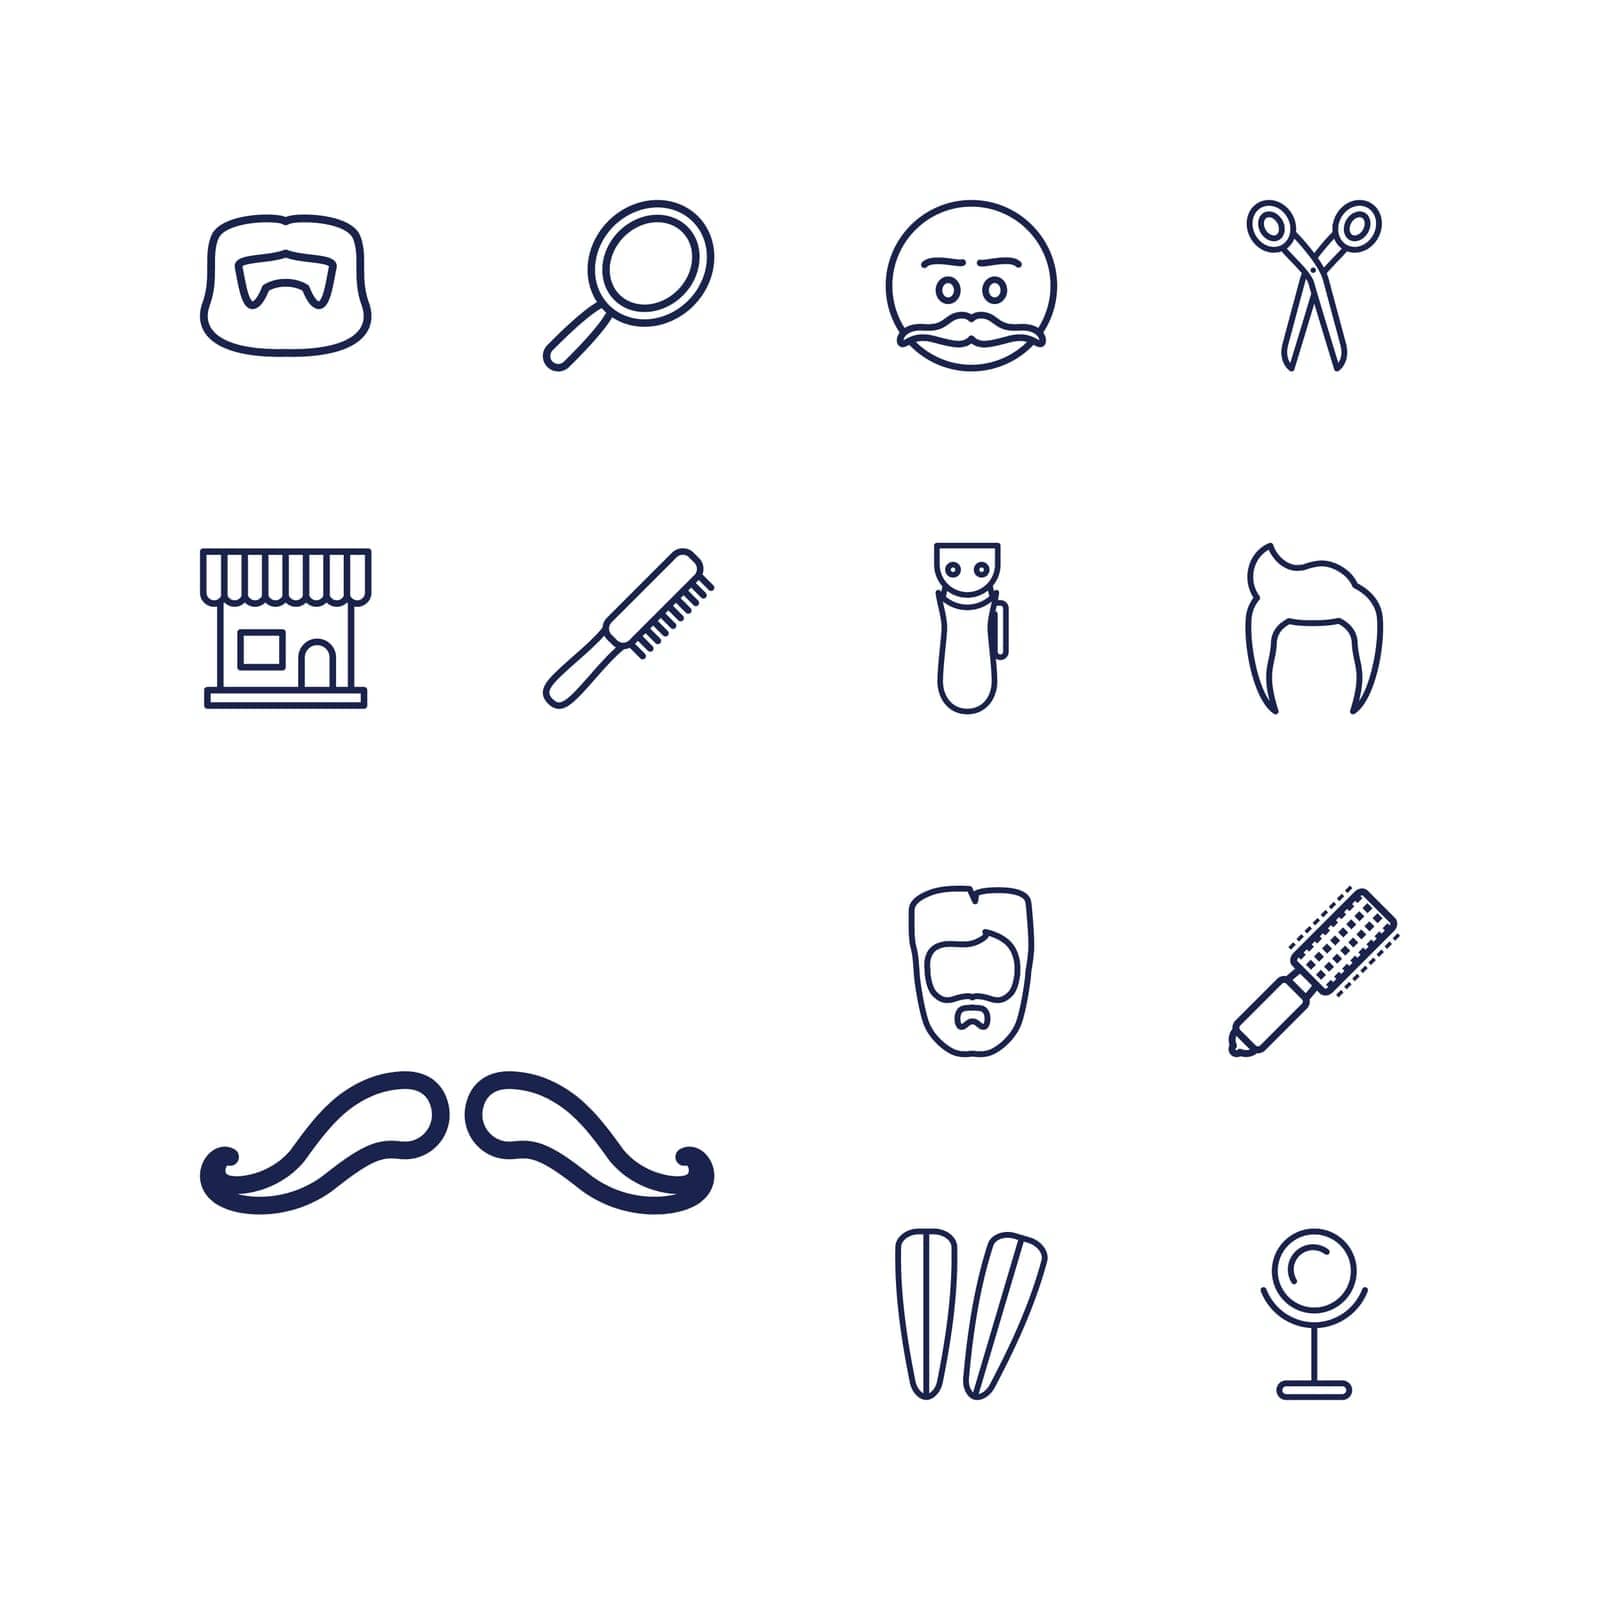 symbol,mirror,beauty,icon,sign,isolated,mustache,hair,design,vector,man,barber,graphic,shave,brush,emot,set,electric,black,haircut,comb,hairstyle,scissors,barrette,with,face,background,silhouette,style,razor,illustration,male,fashion,care,salon